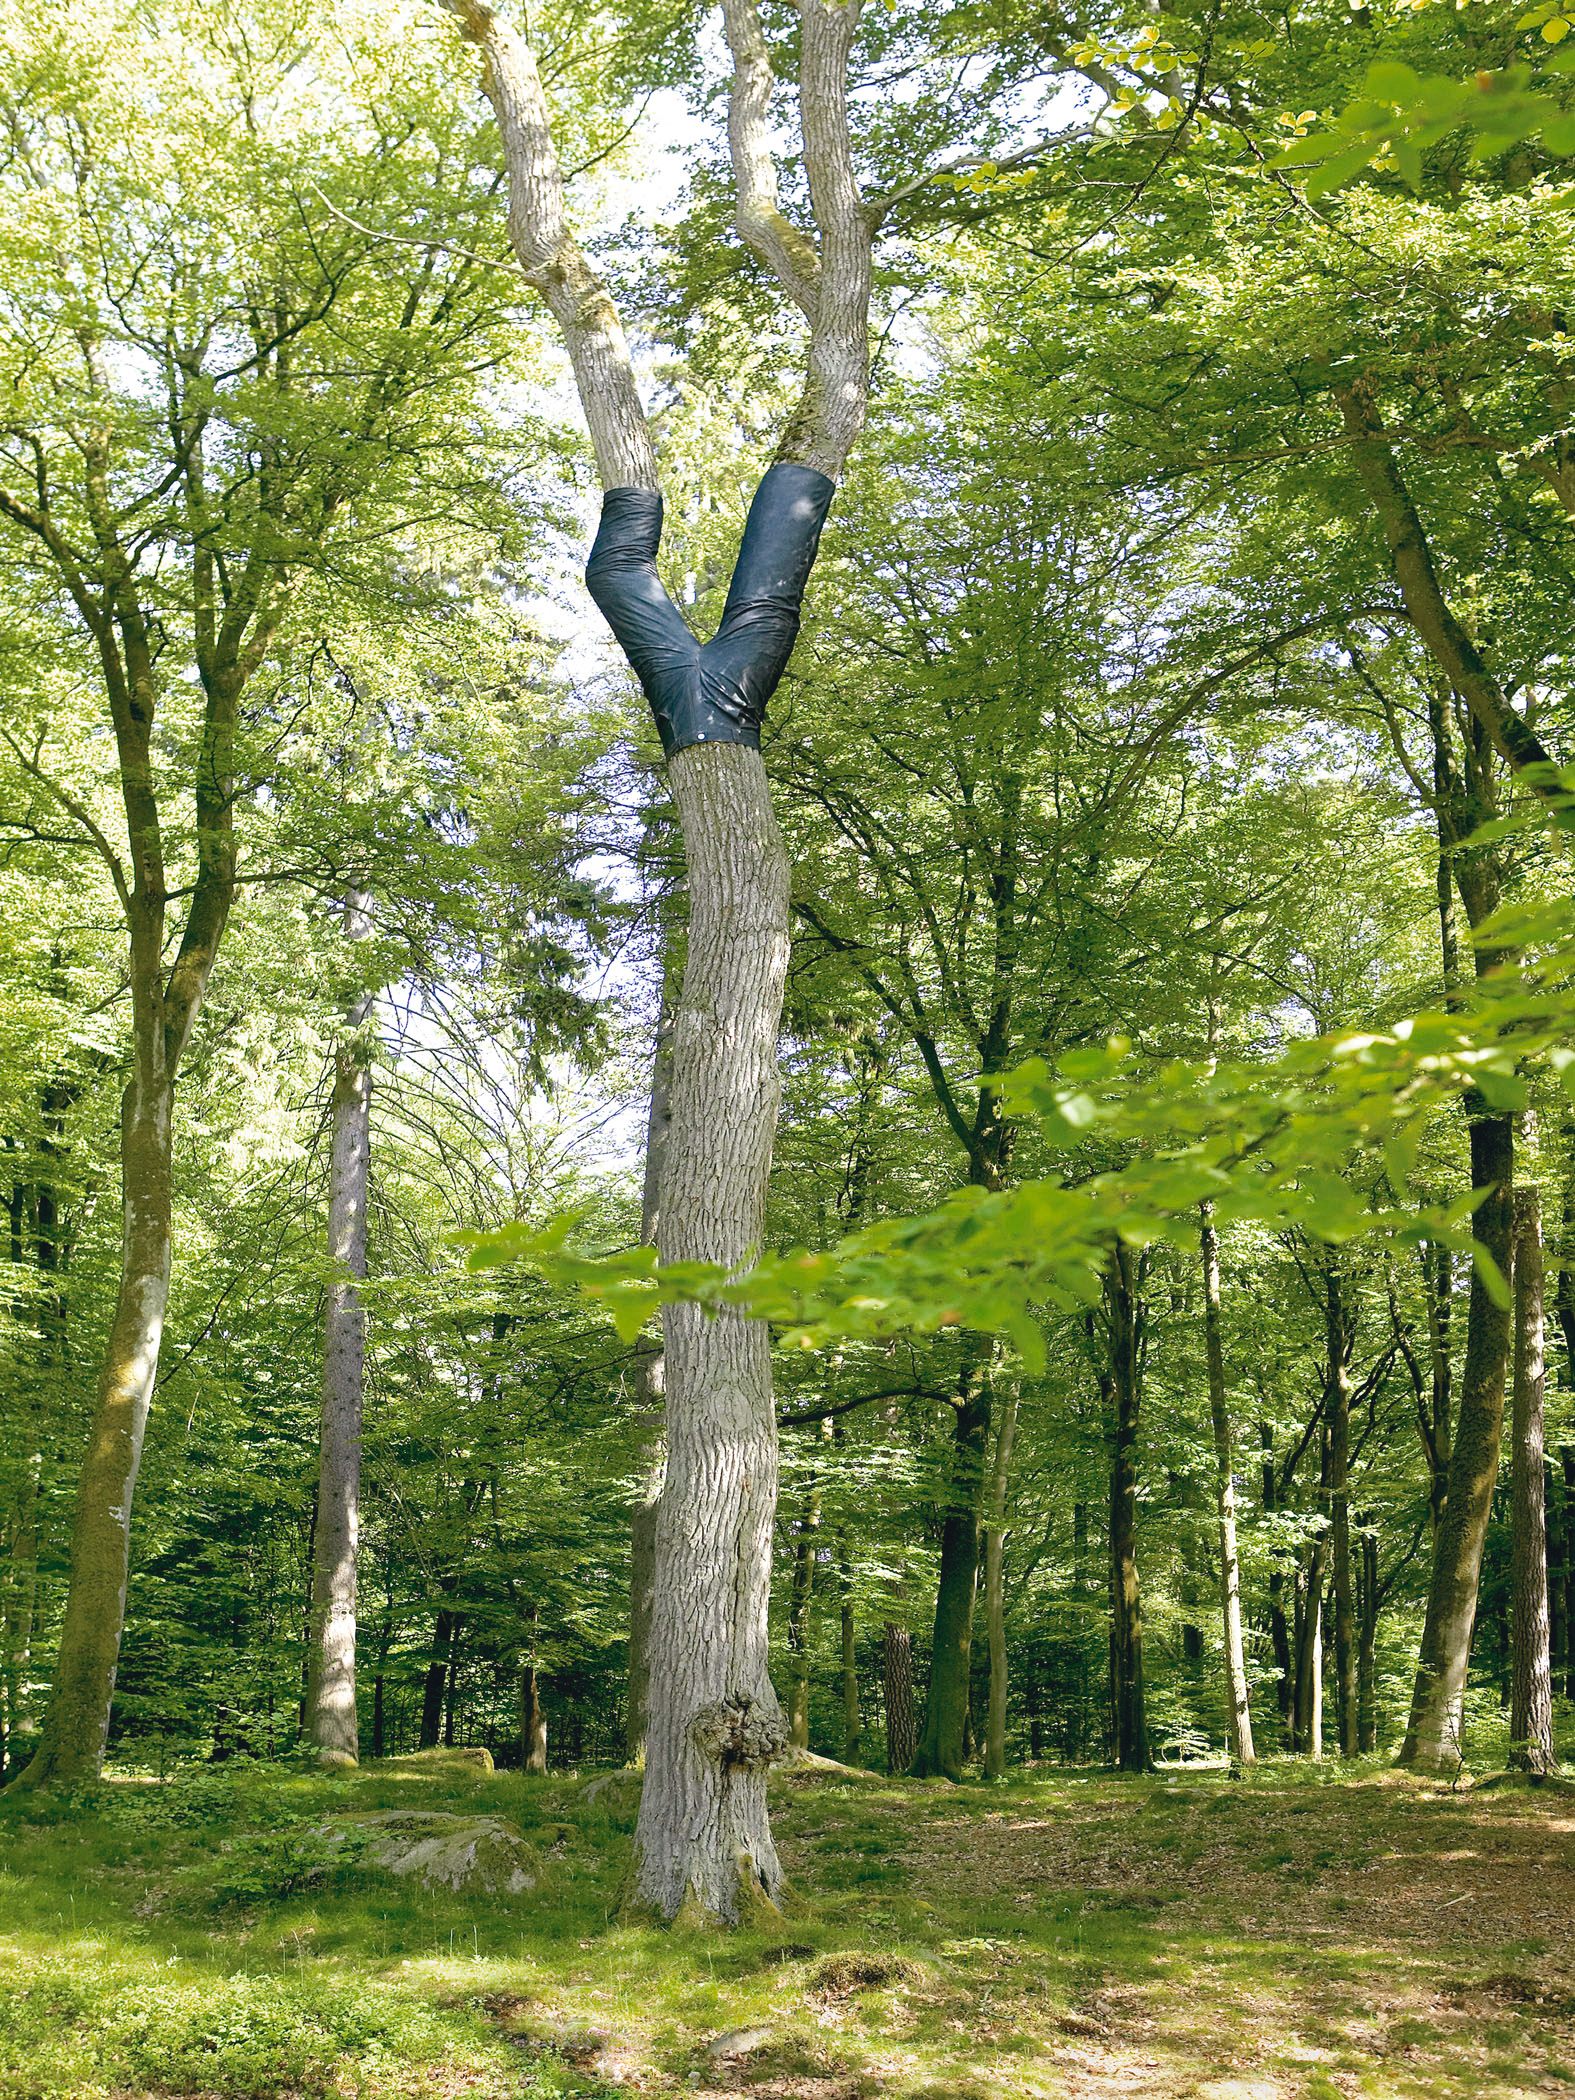 The Plant-Loving Artist Who Puts Pants on Trees - Atlas Obscura